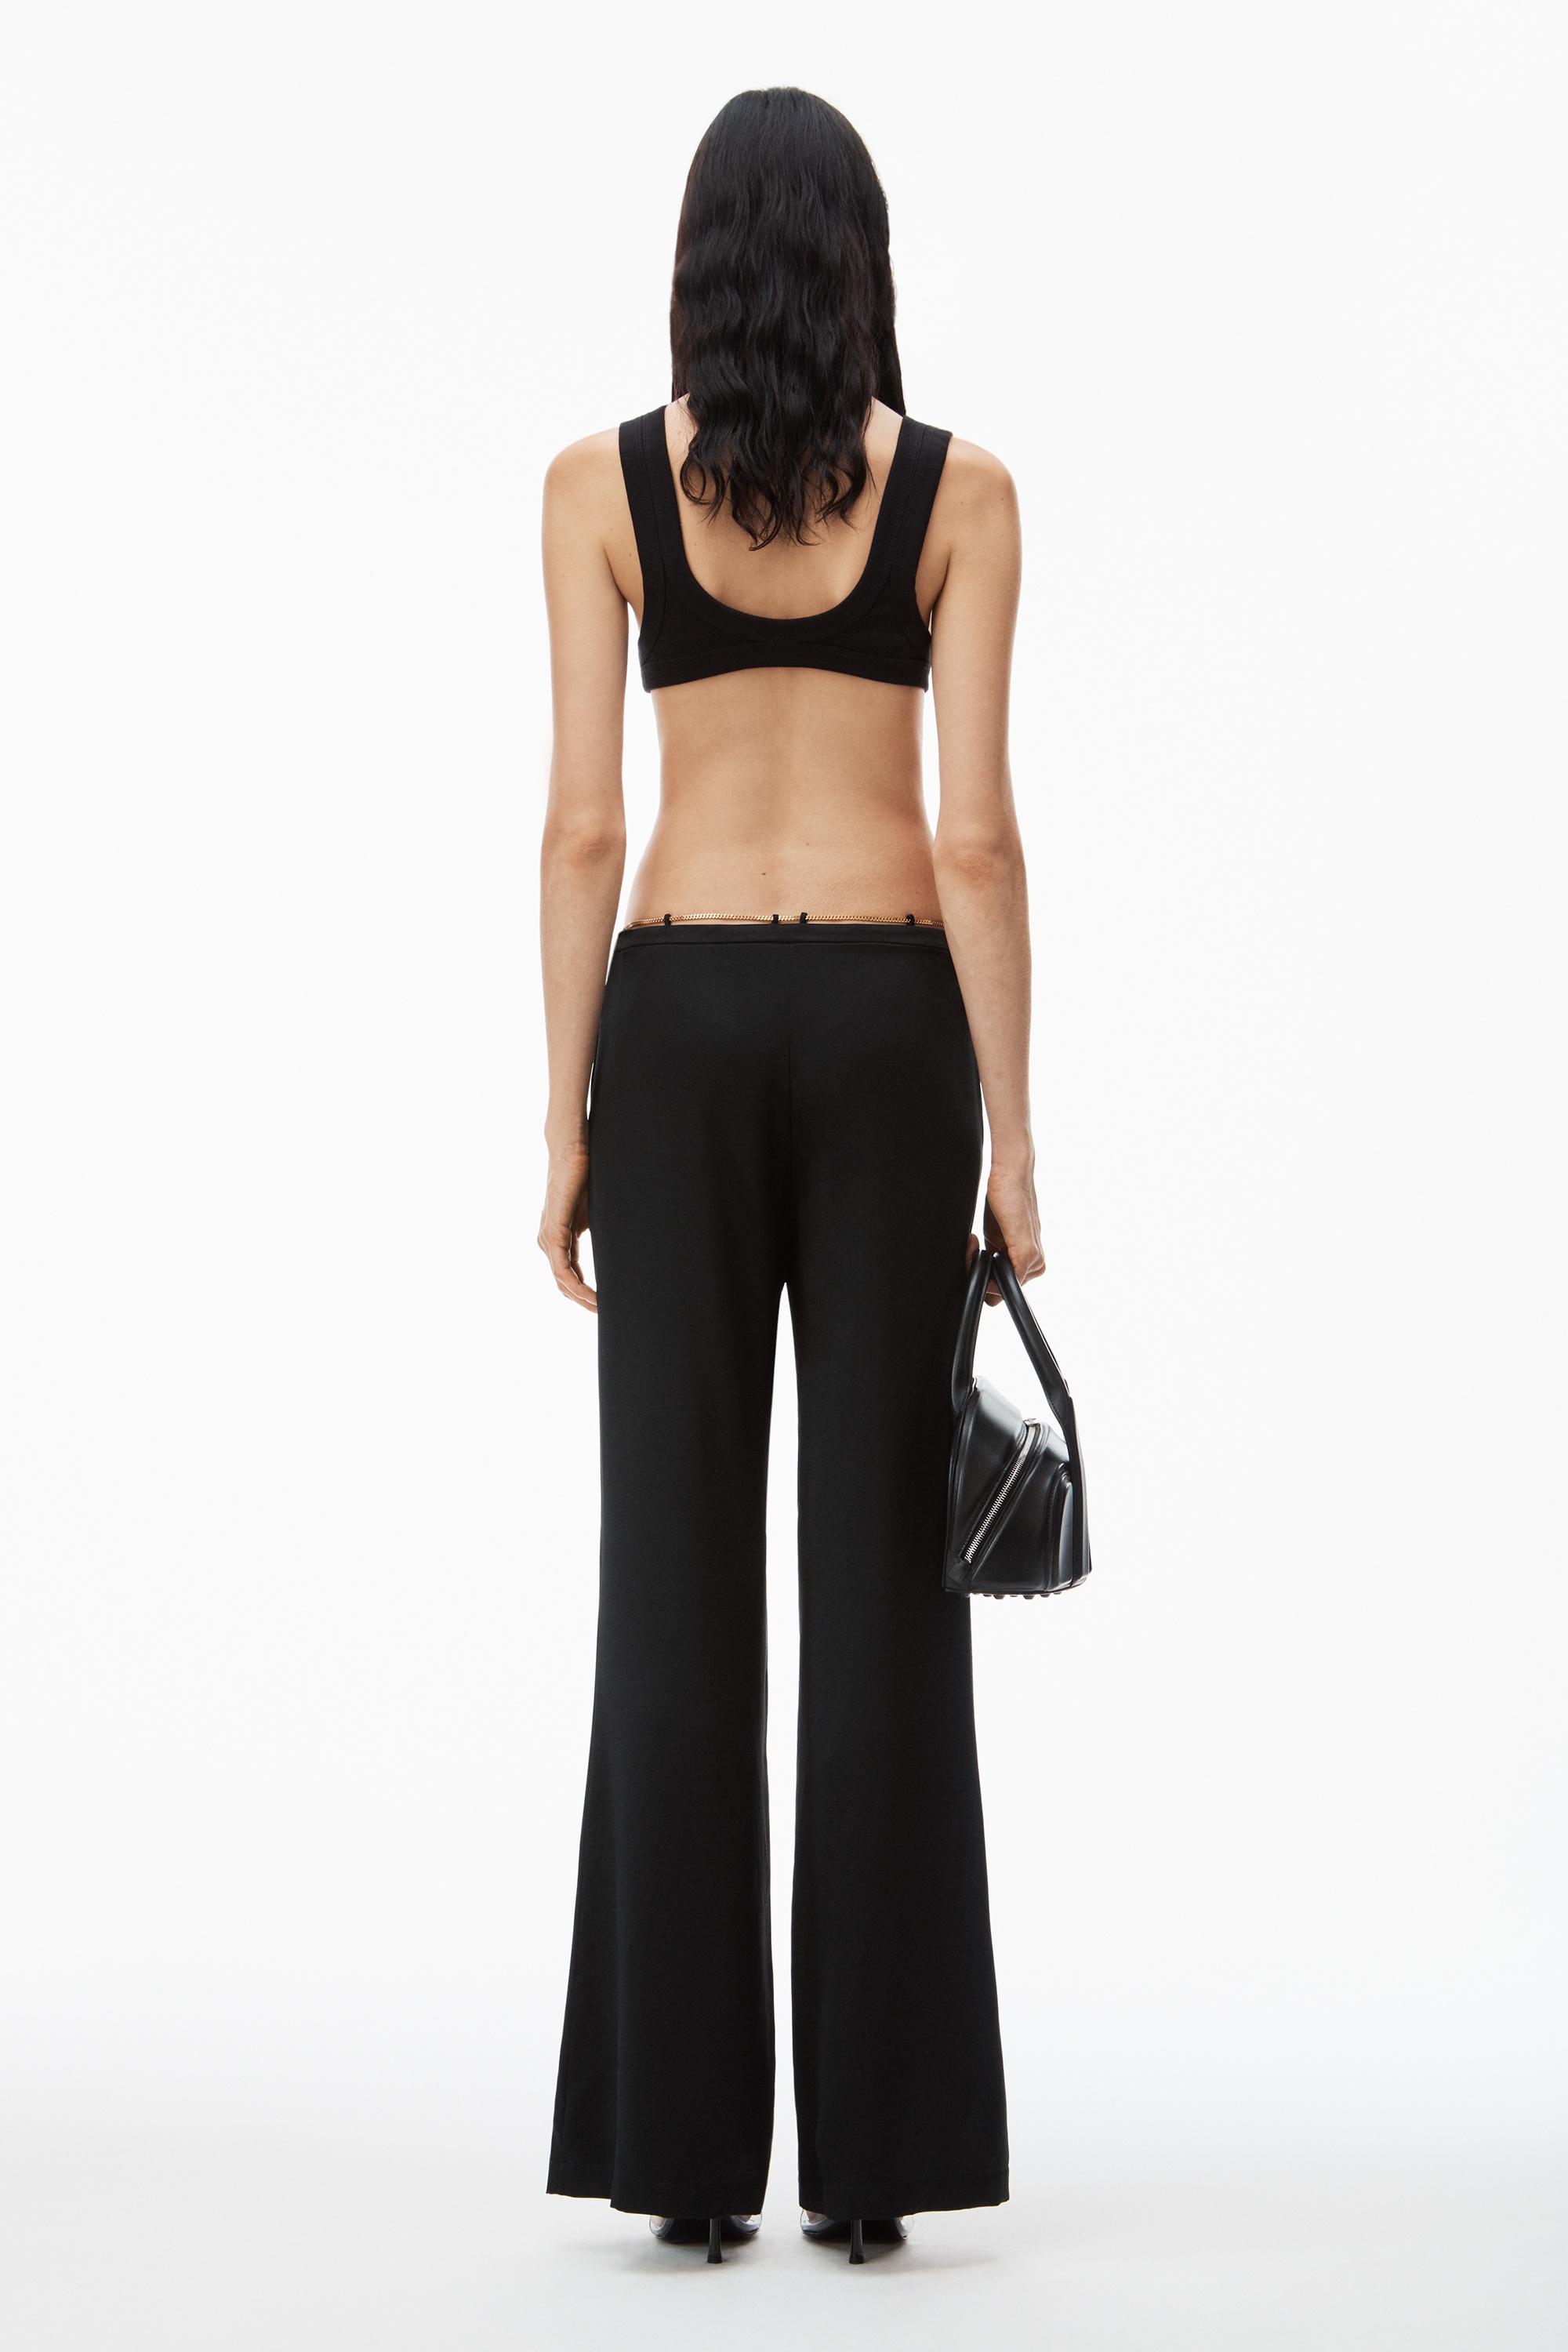 silk charmeuse flared low rise pant with nameplate - 5